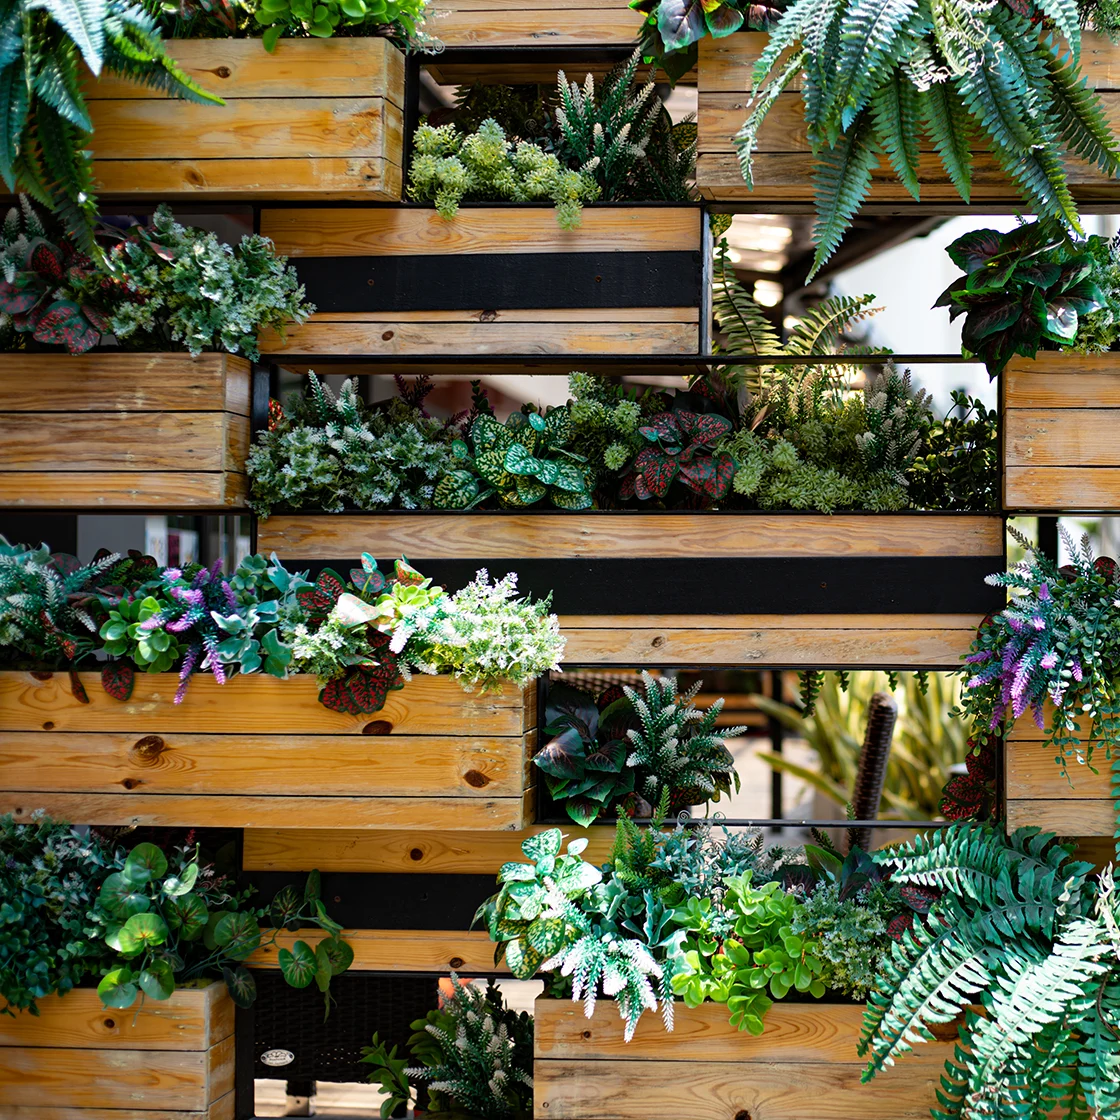 Living wall with hanging baskets 1120x1120